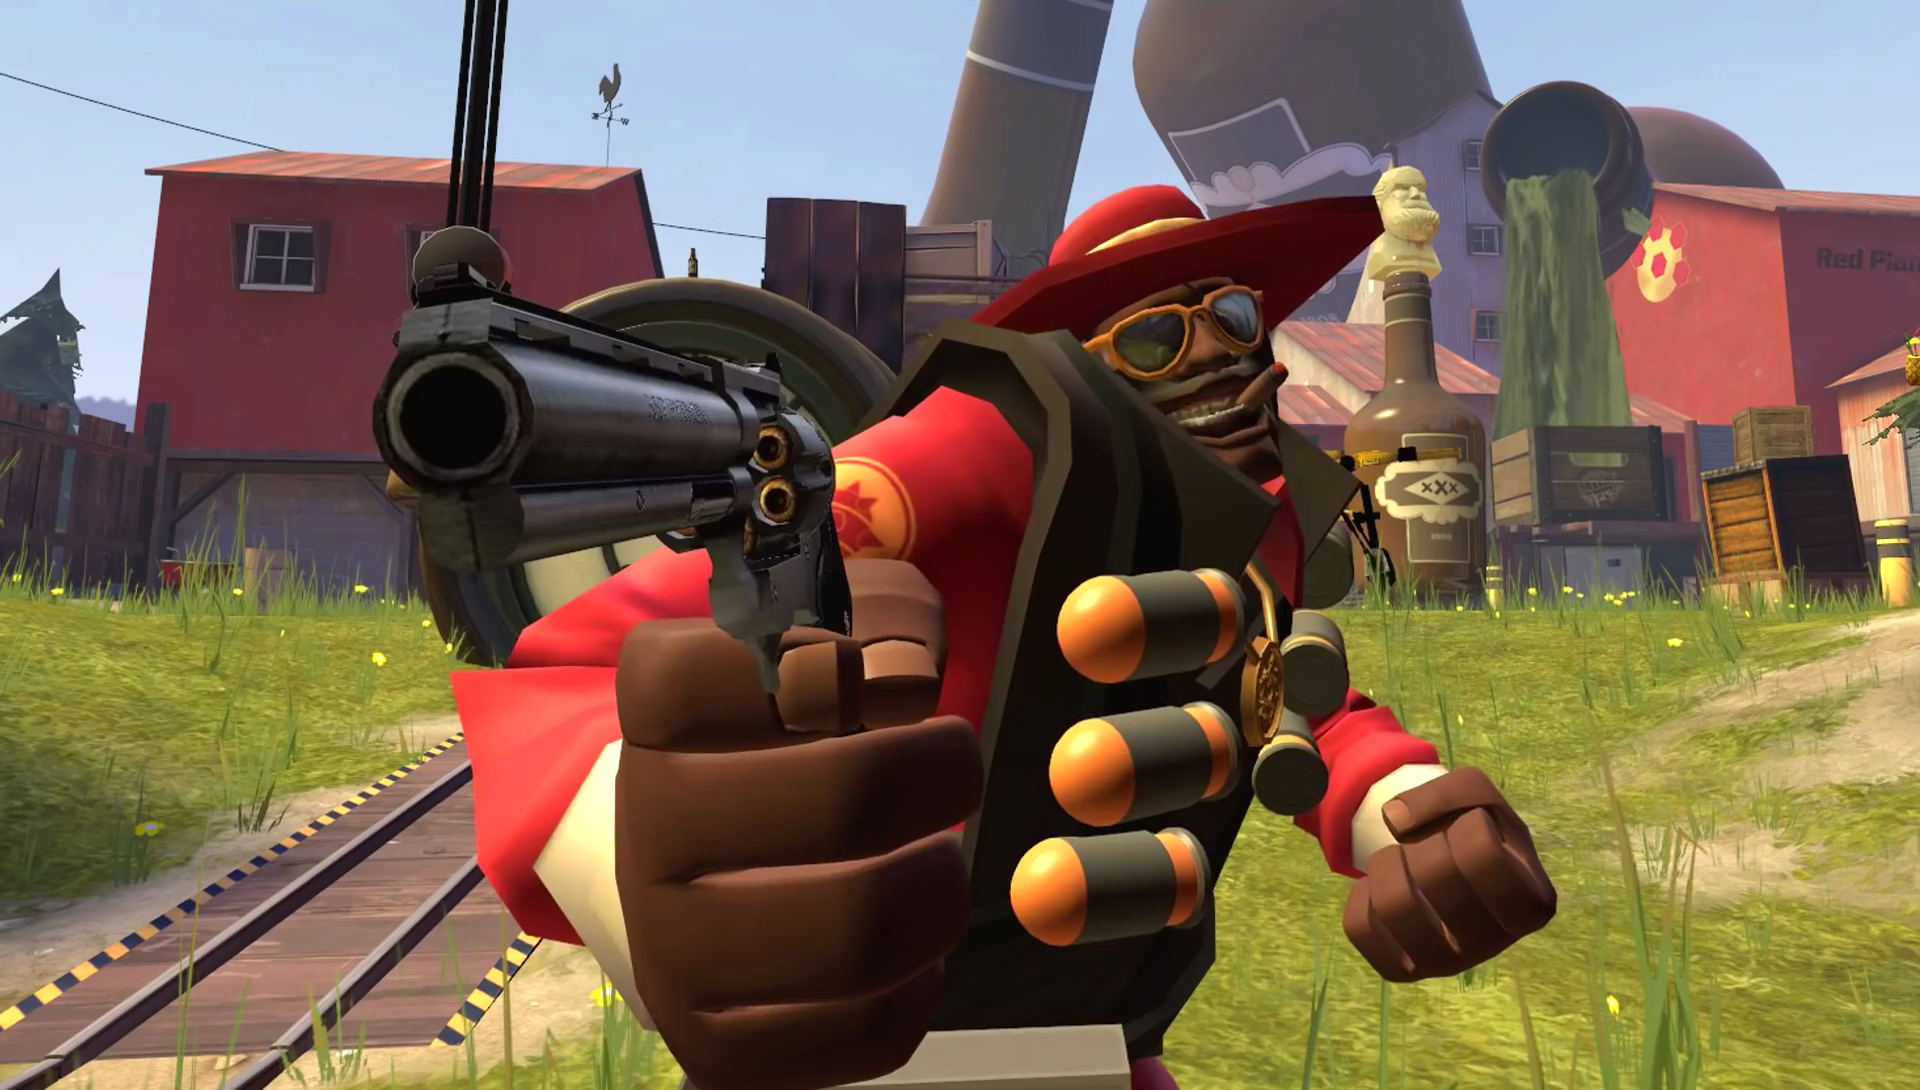 No "Demoman with gun" memes have been featured yet. 